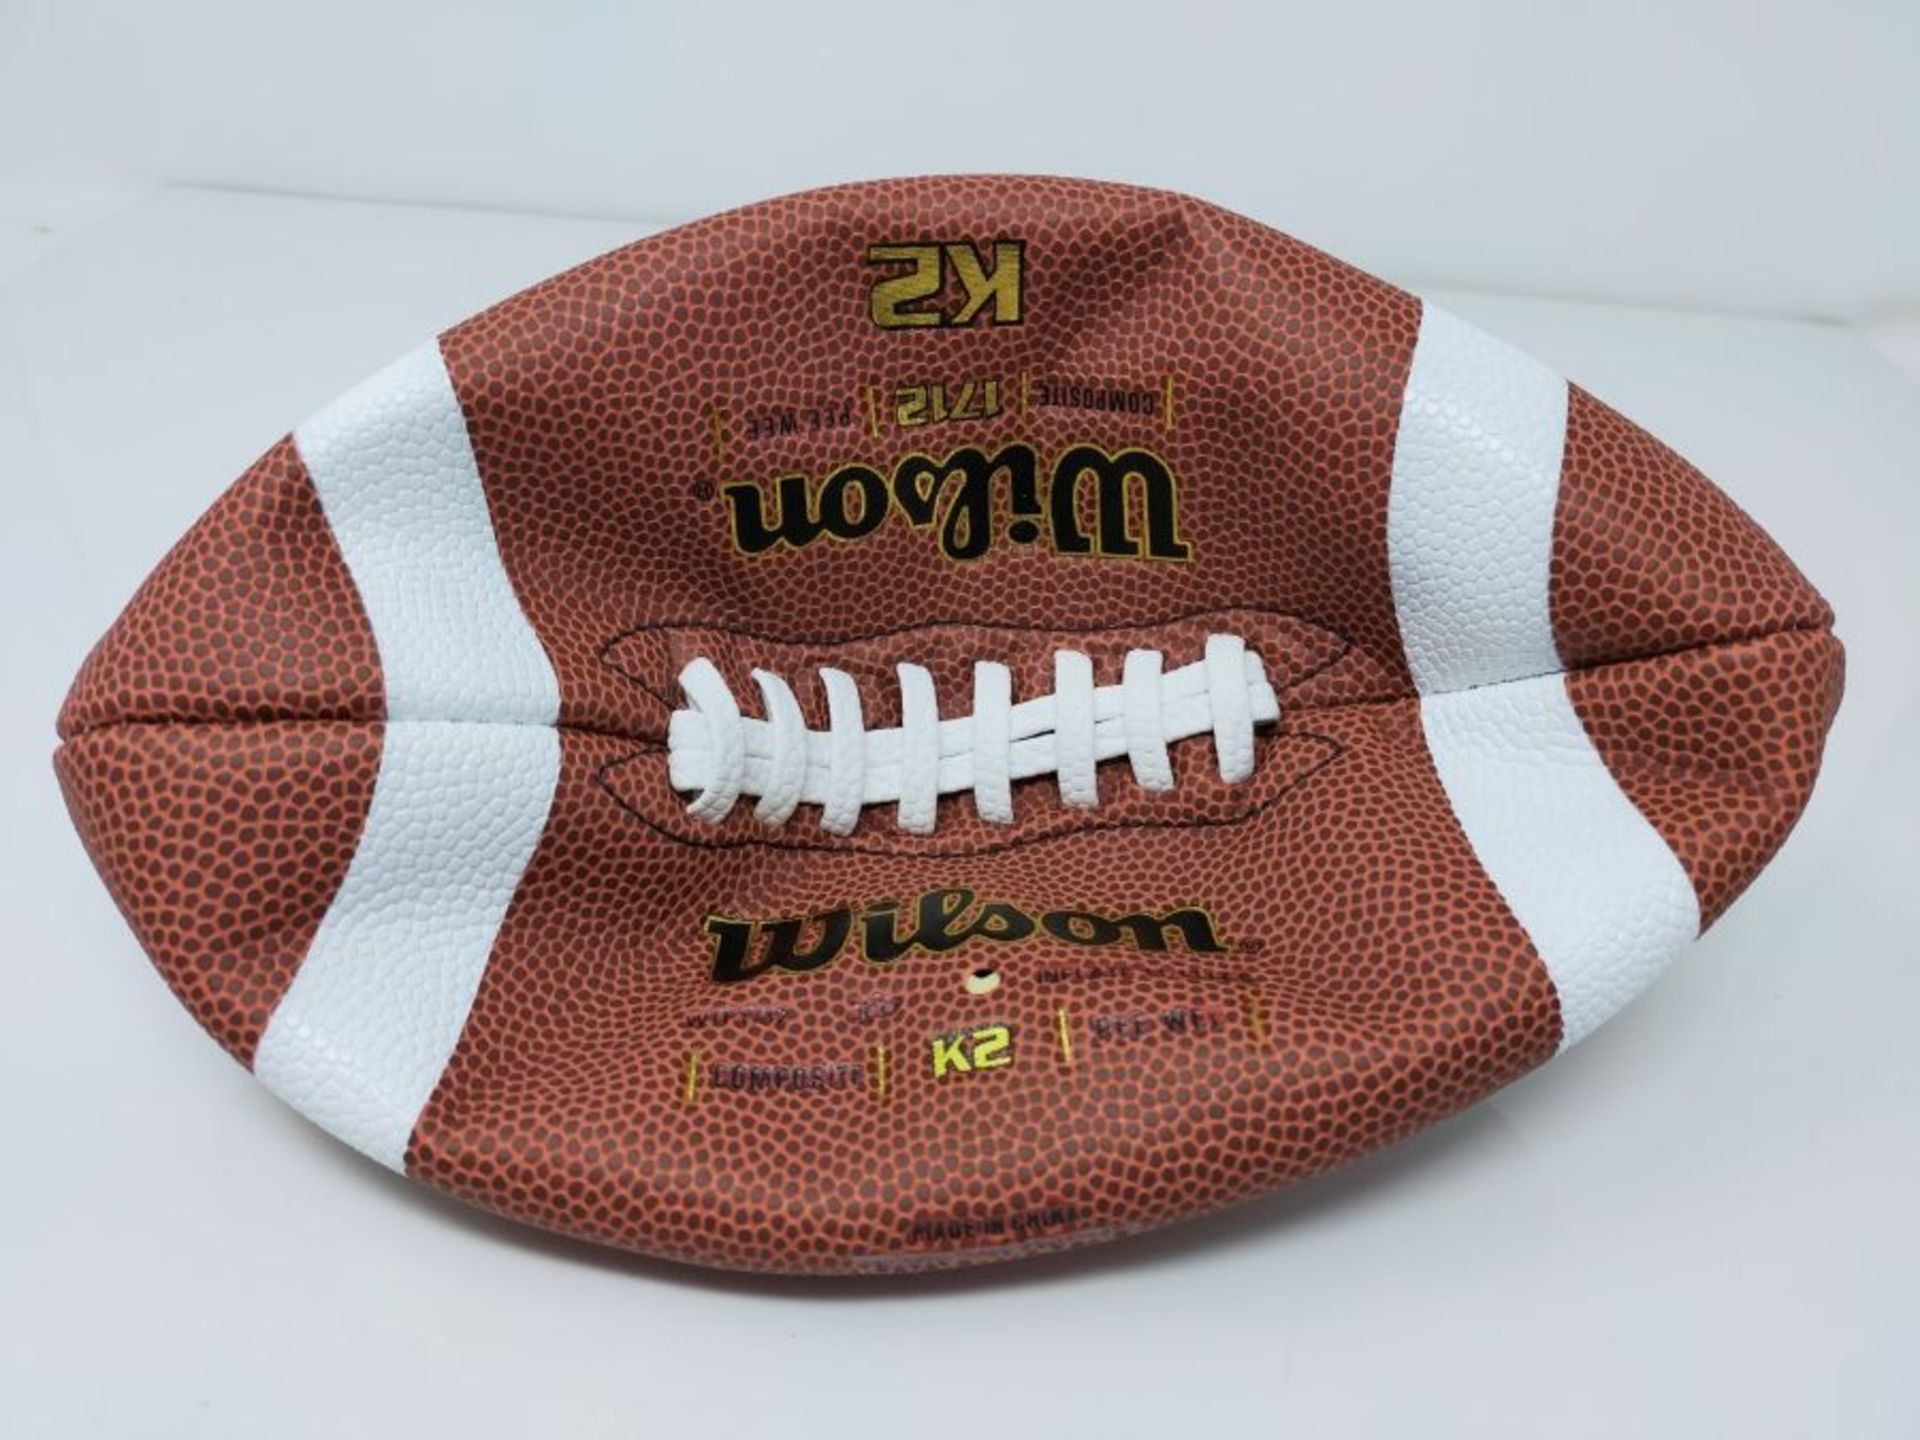 Wilson American Football for Children and Teenagers, Mixed Leather, K2 COMPOSITE, Brow - Image 2 of 3